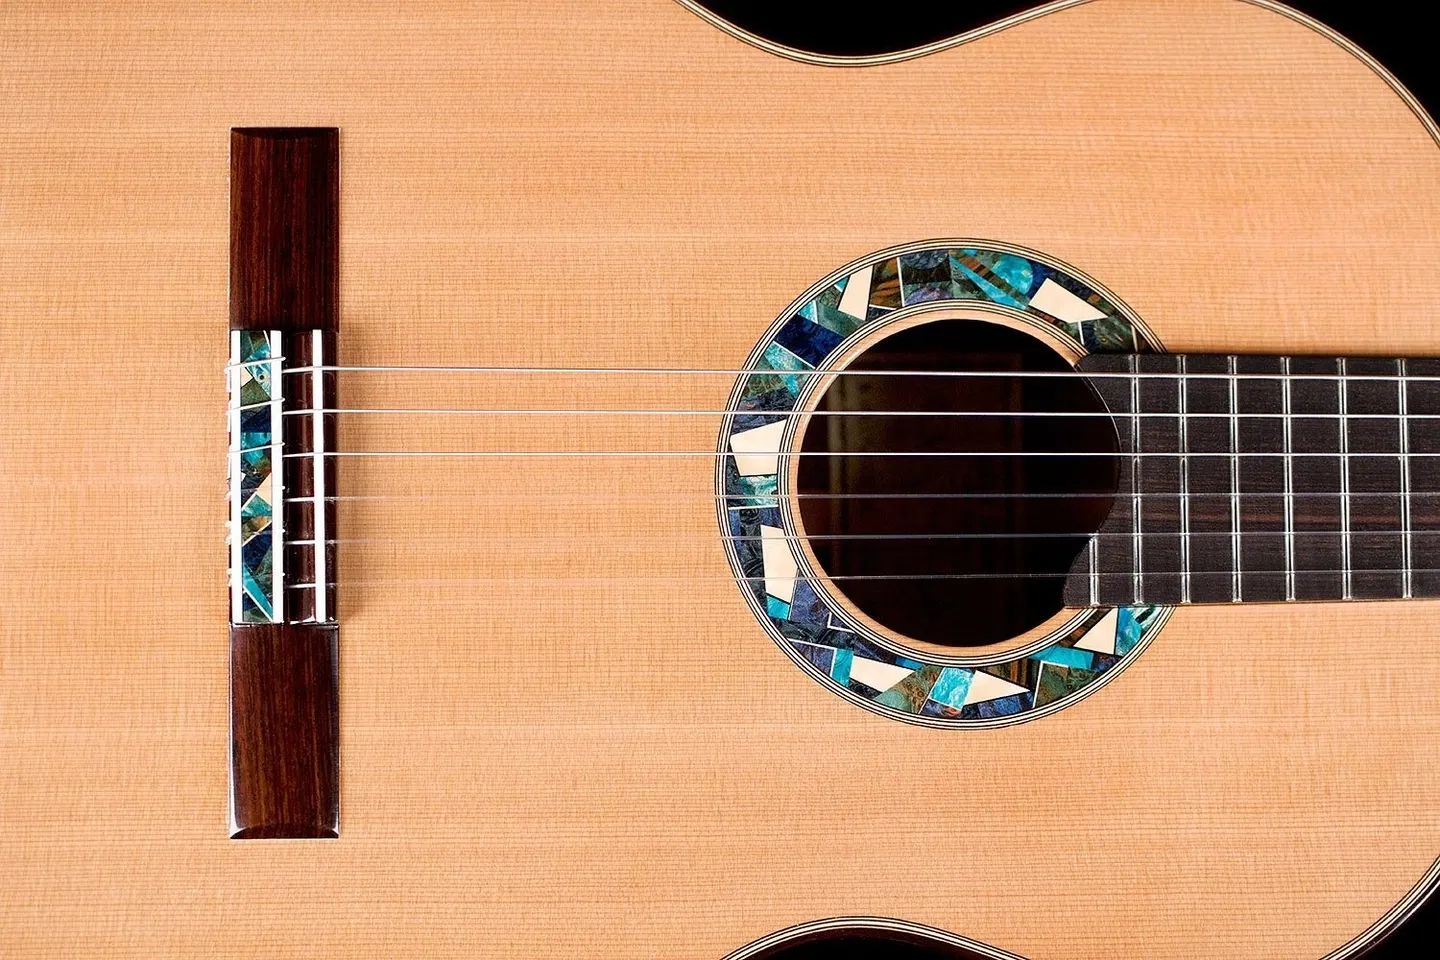 A beautiful craftmanship of the guitar with patterns